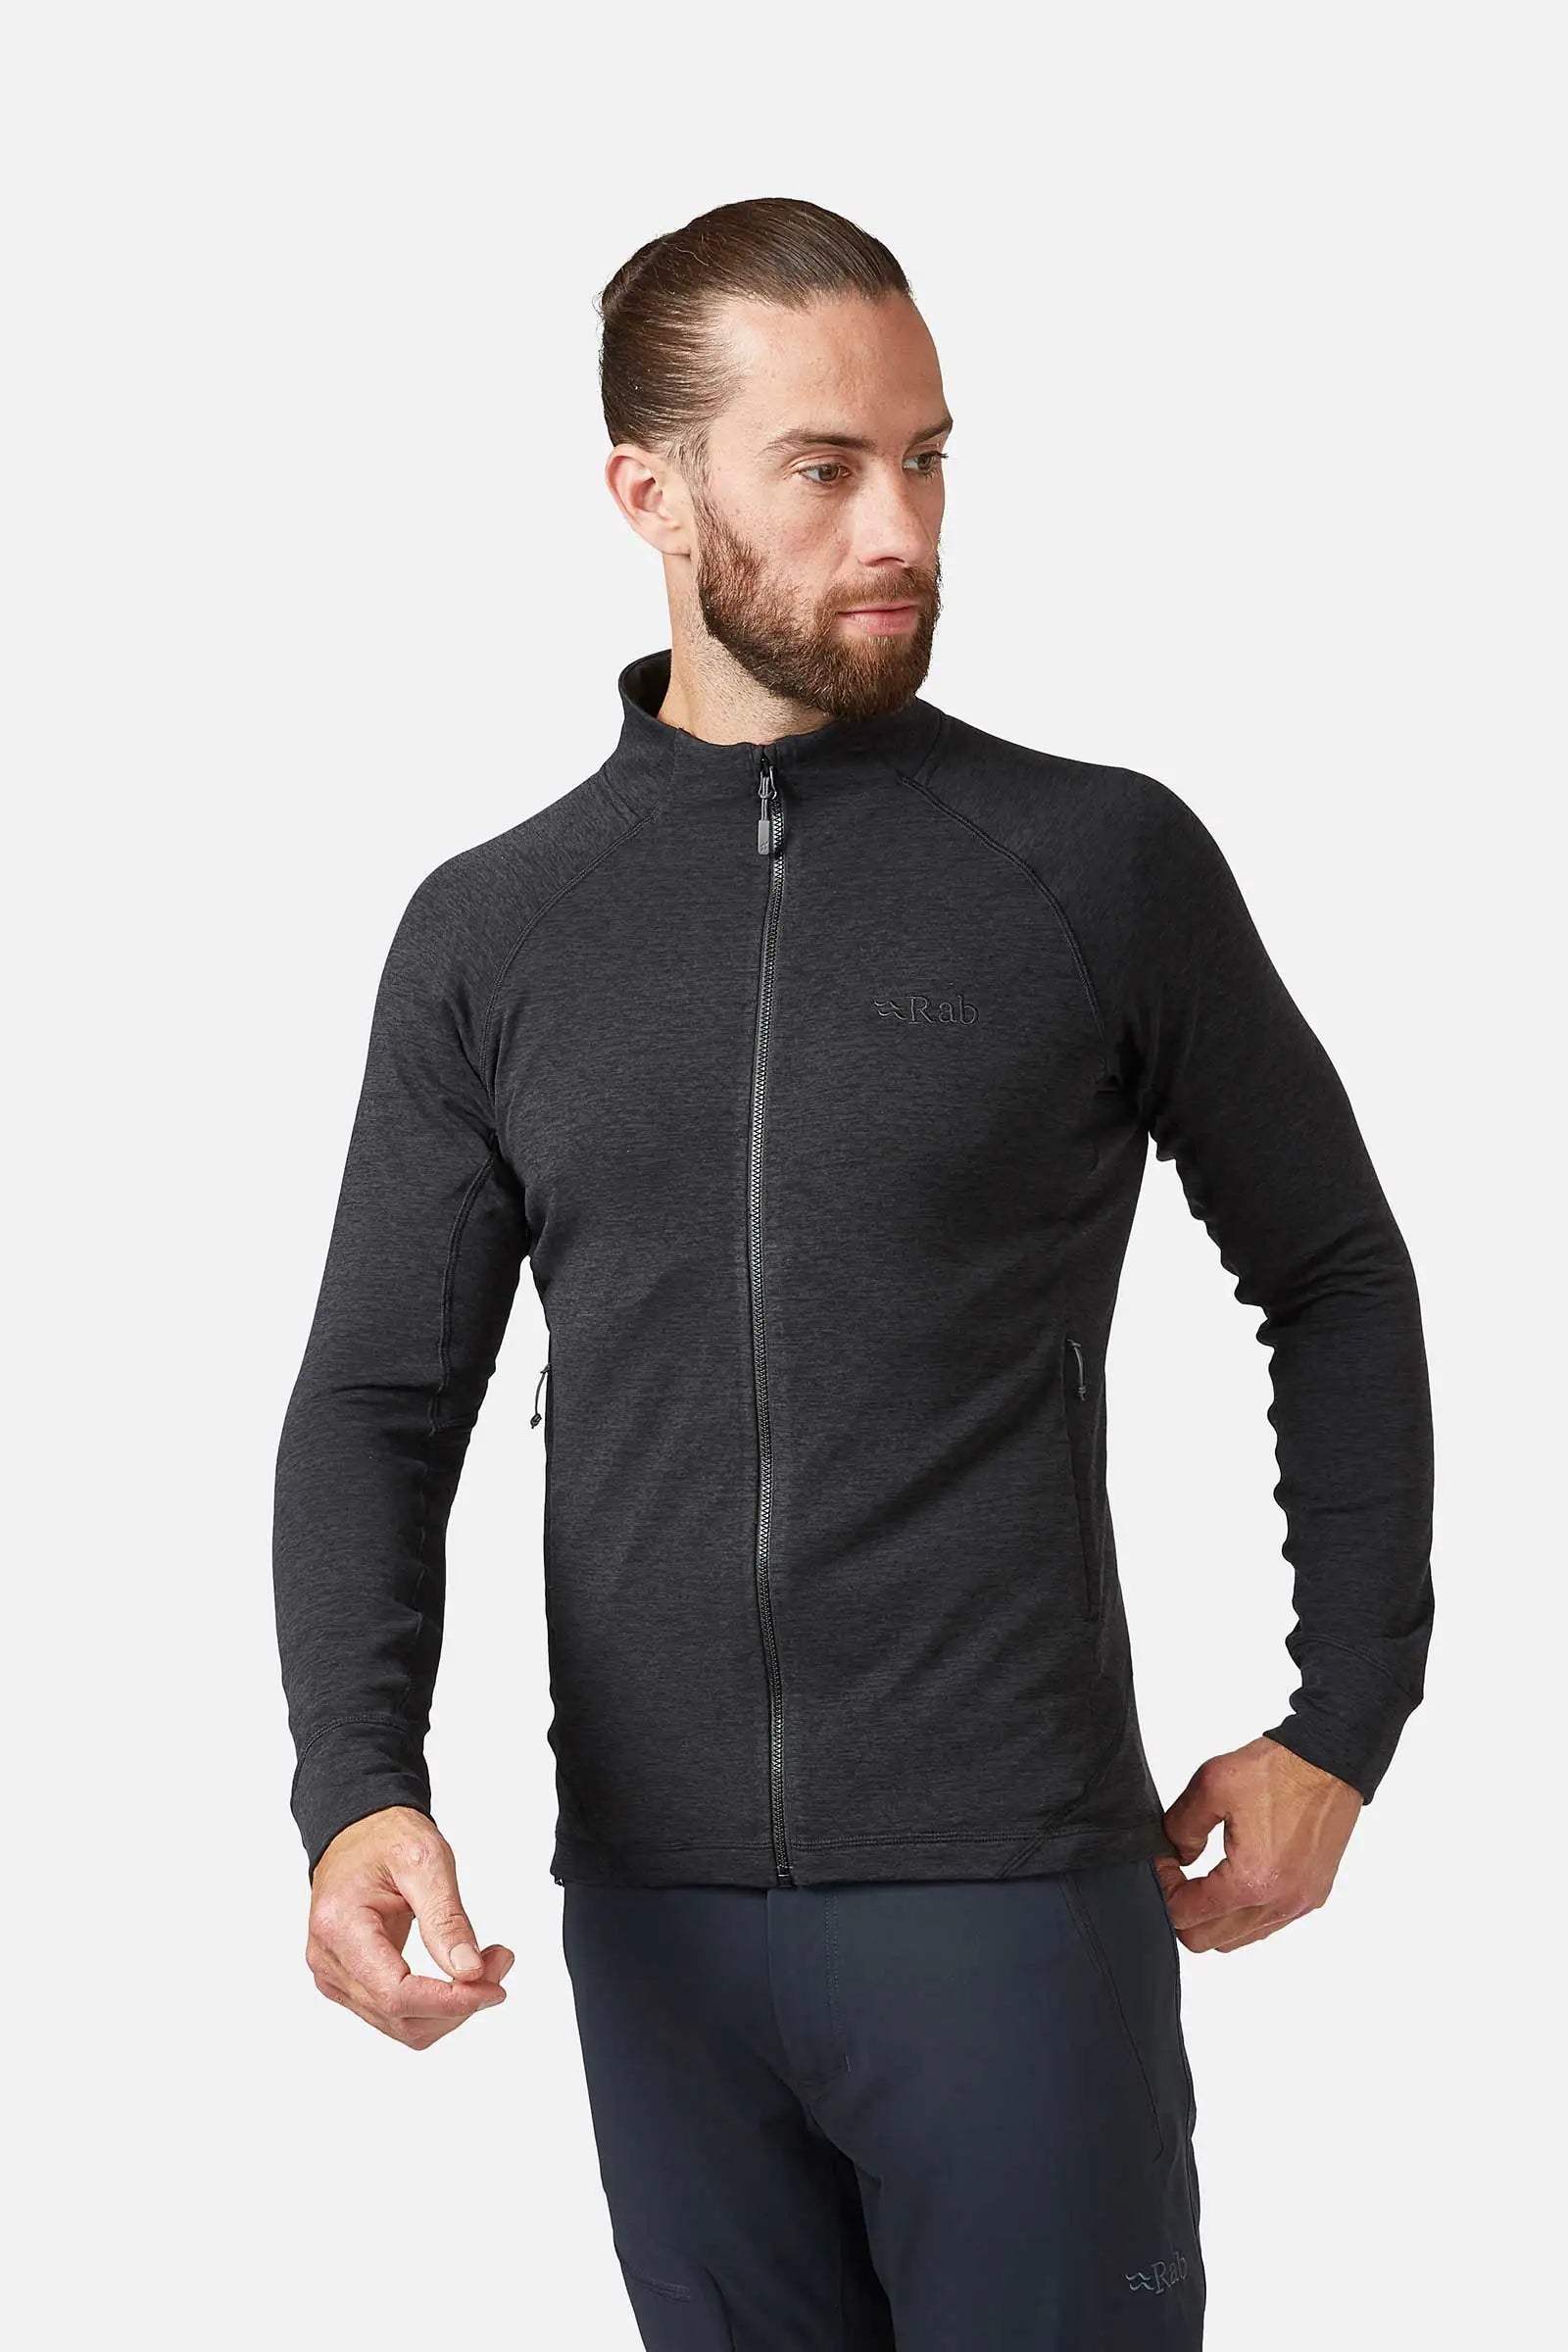 Men’s Nexus Jacket by RAB - The Luxury Promotional Gifts Company Limited